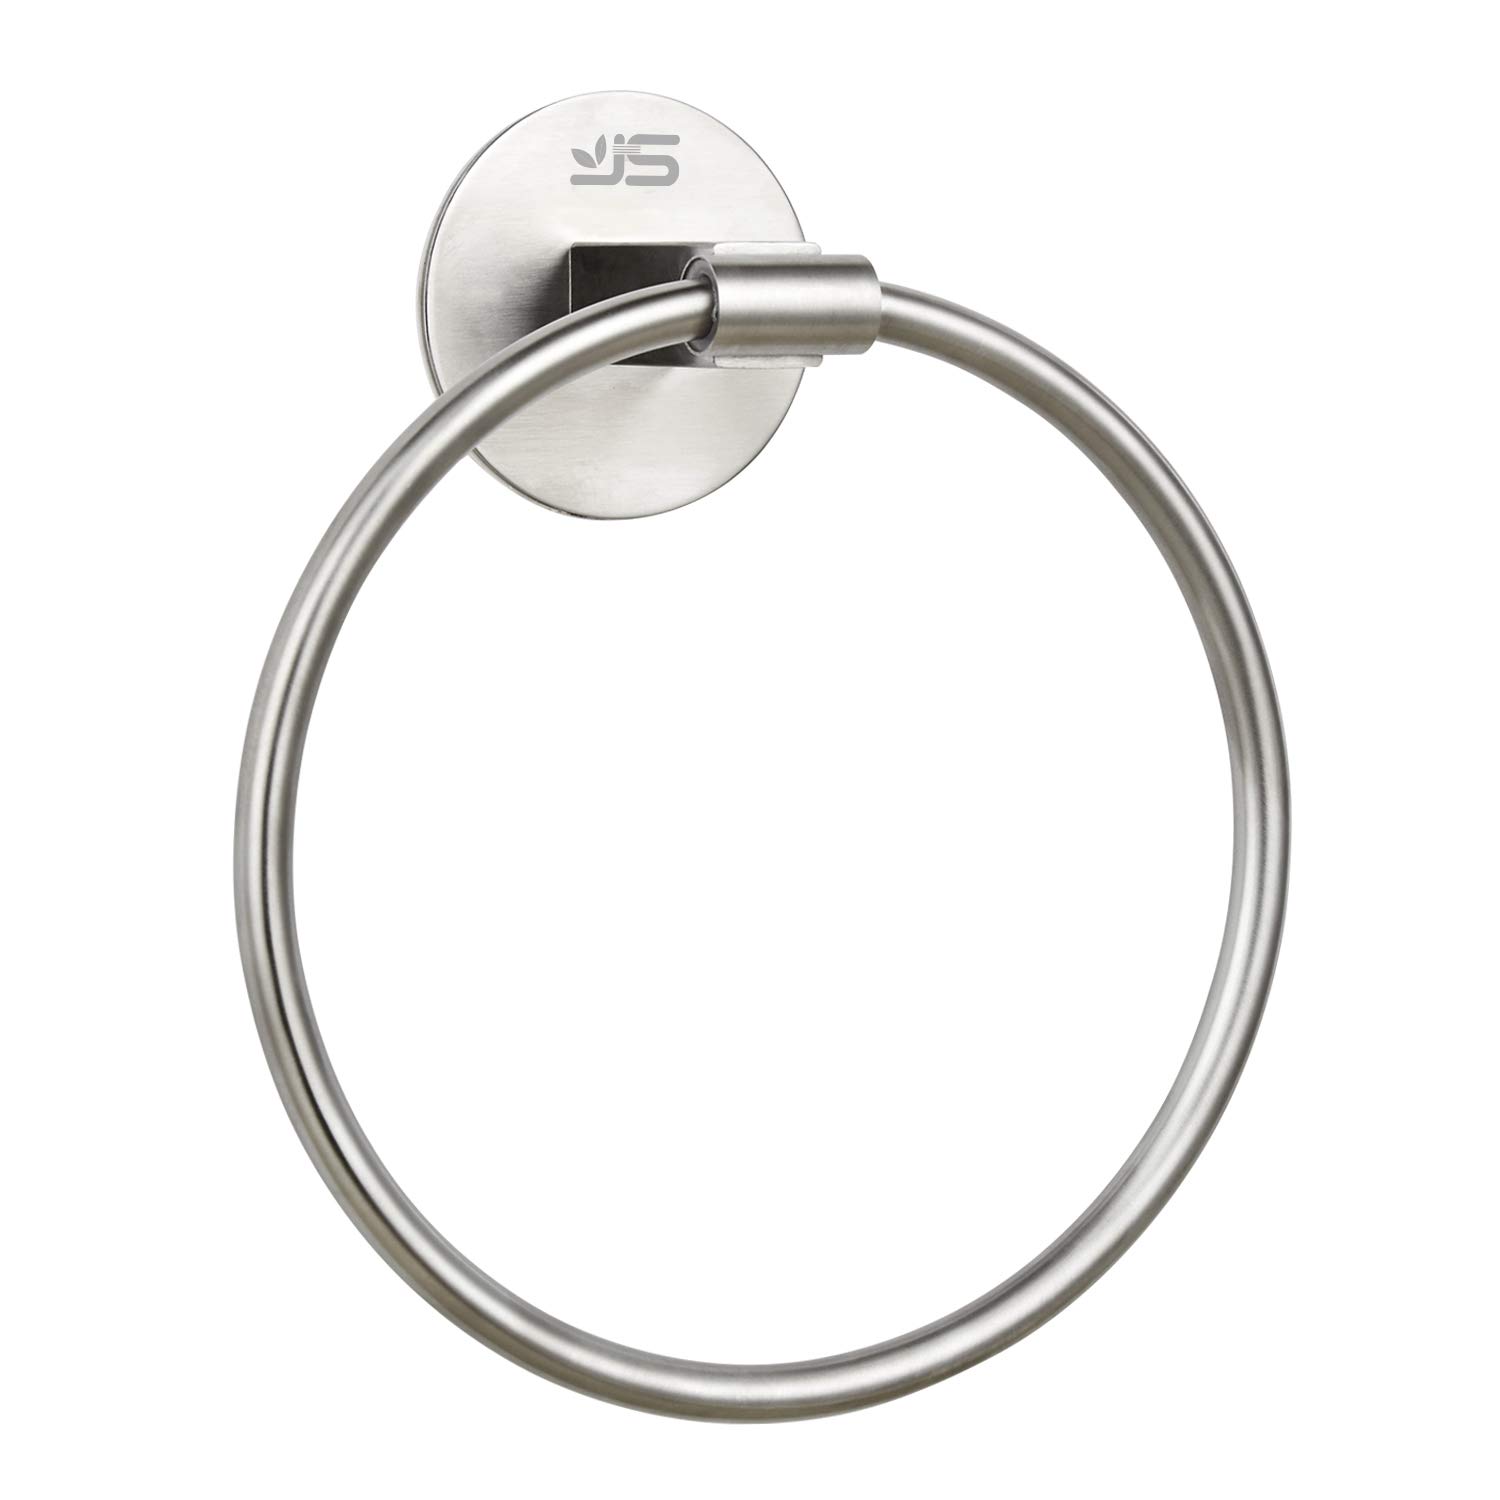 8 Best Self Adhesive Towel Ring for 2023